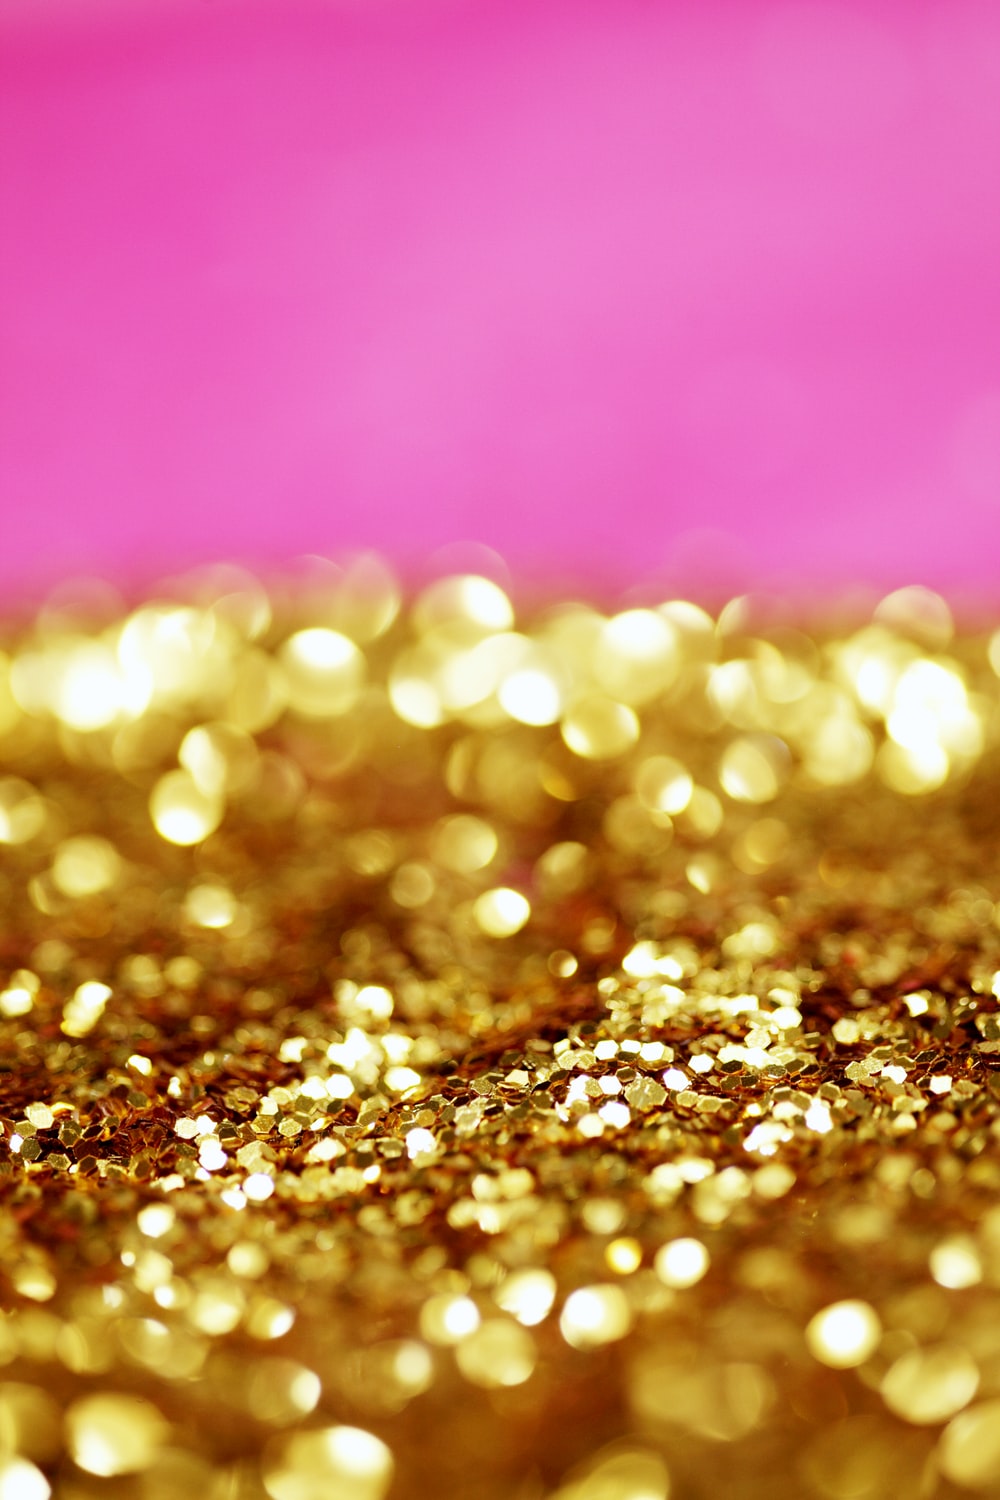 Gold Background Image: Download HD Background